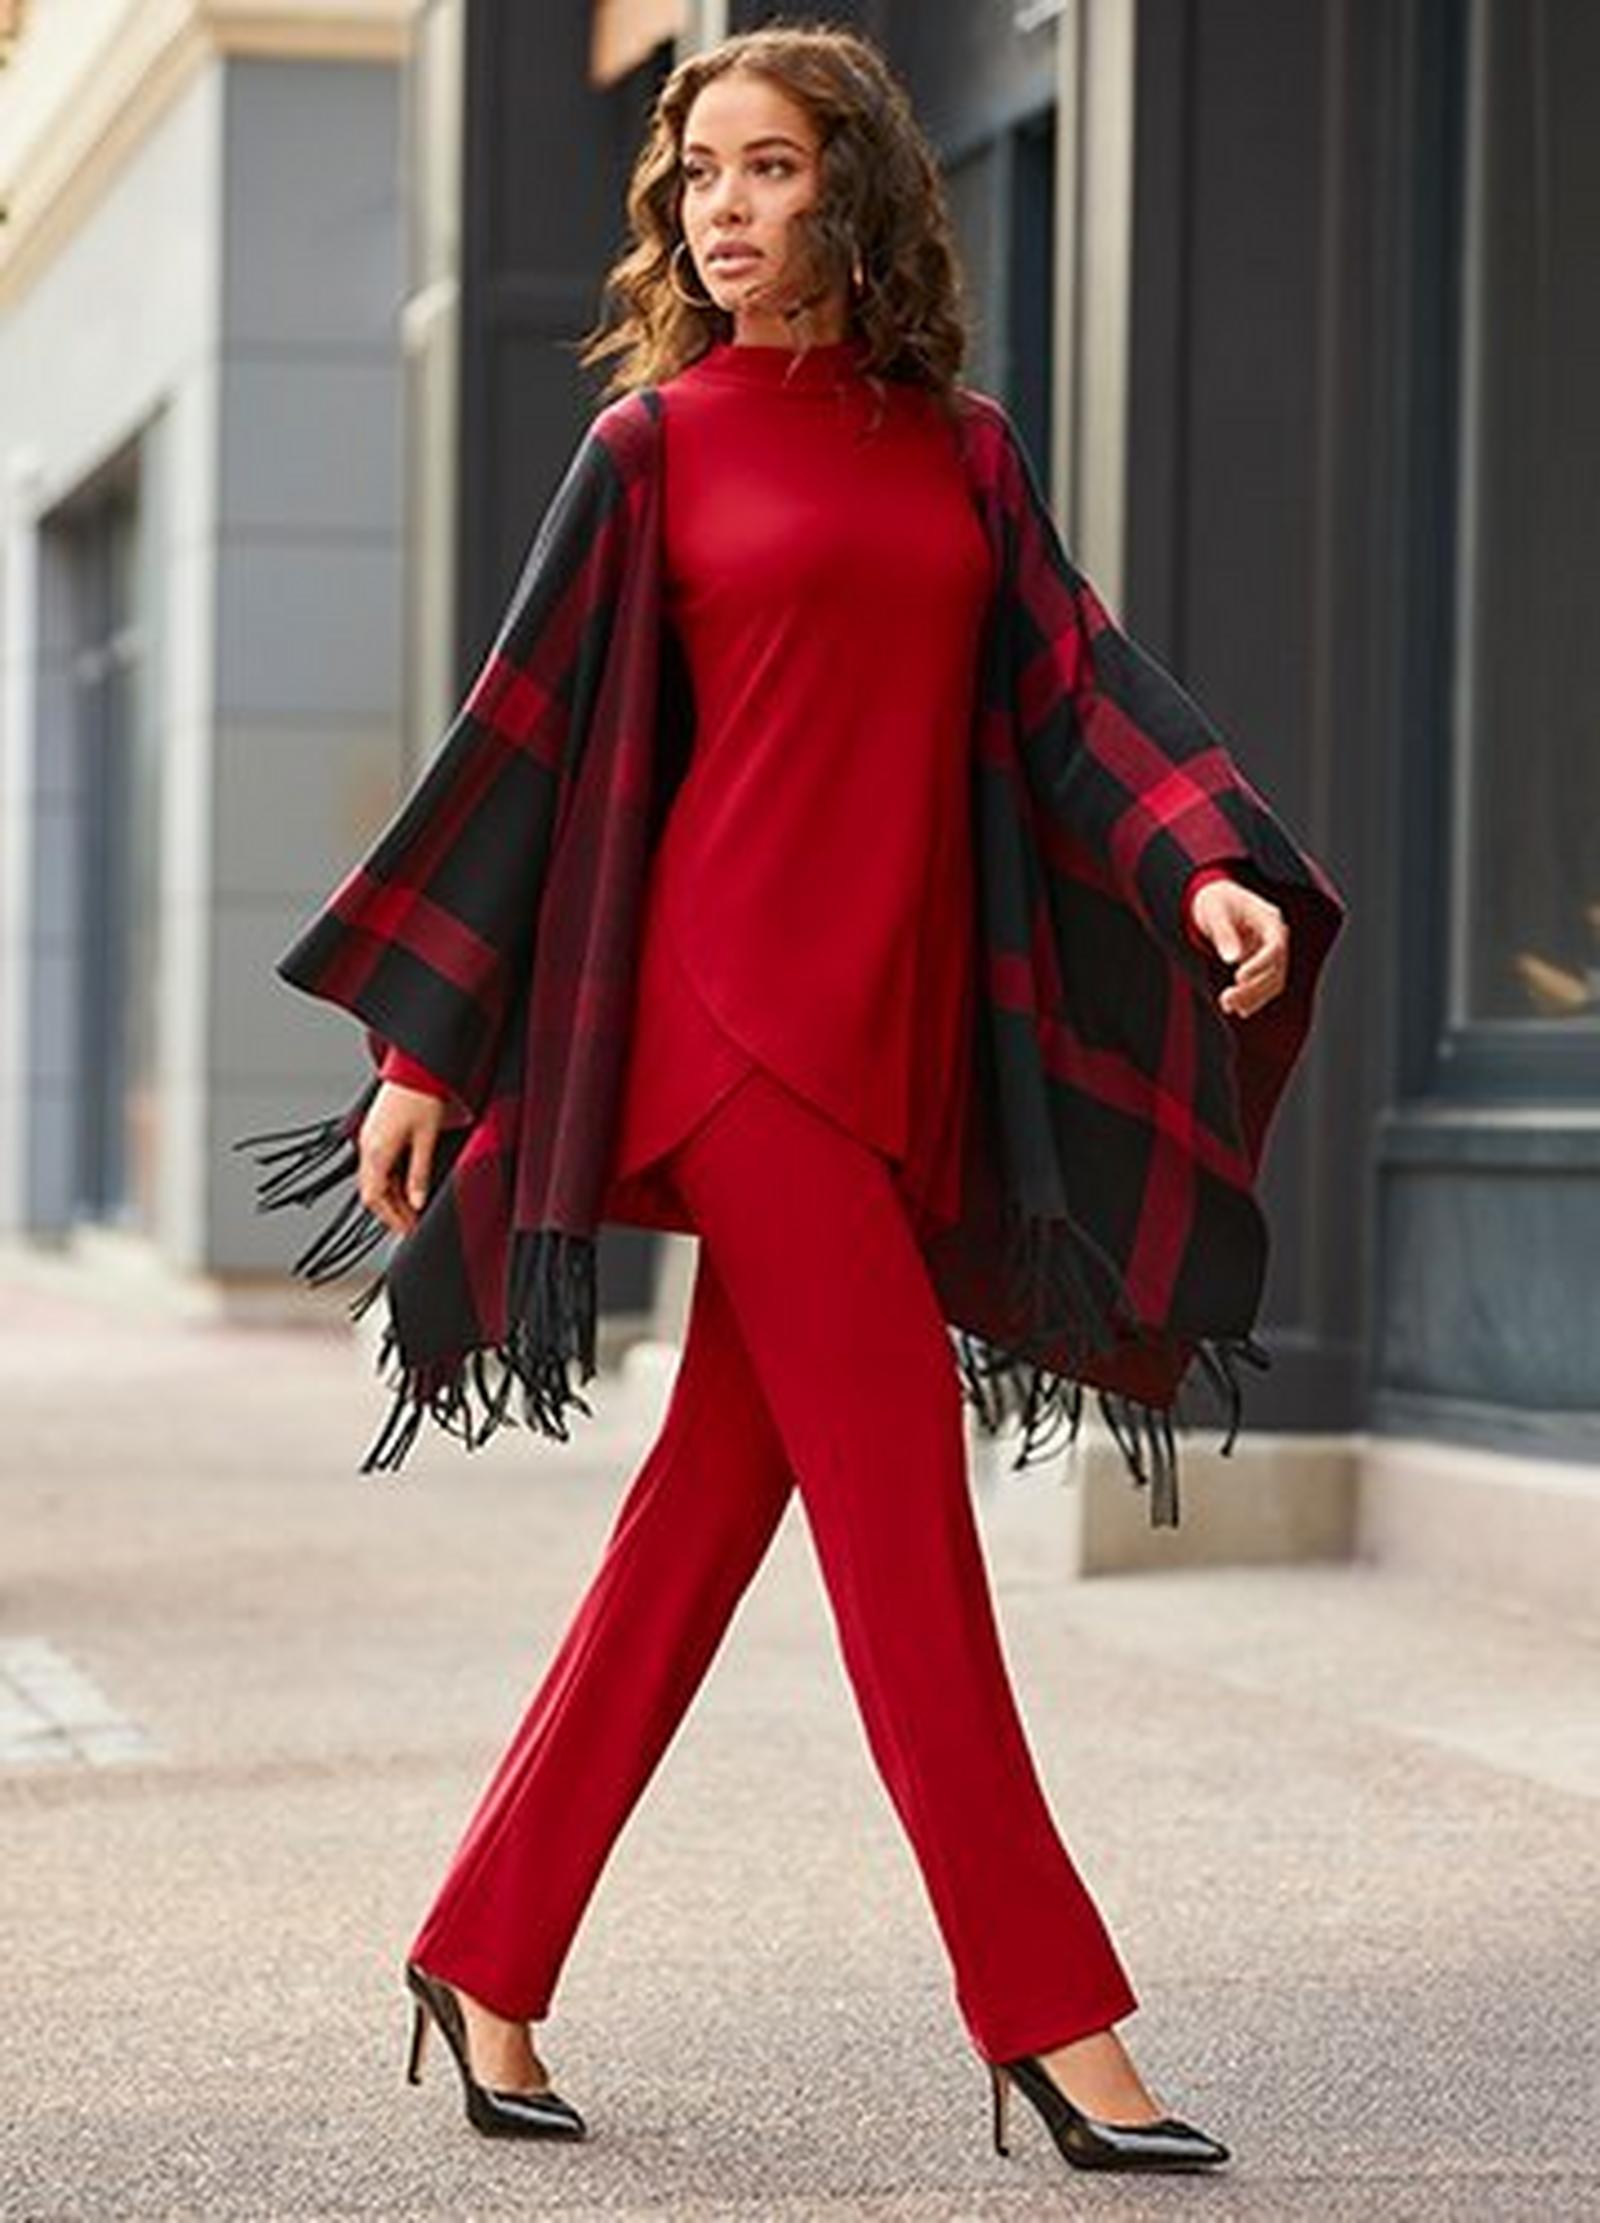 model wearing a red tulip hem mock-neck top, red straight leg pants, black and red plaid fringe poncho, and black pumps.